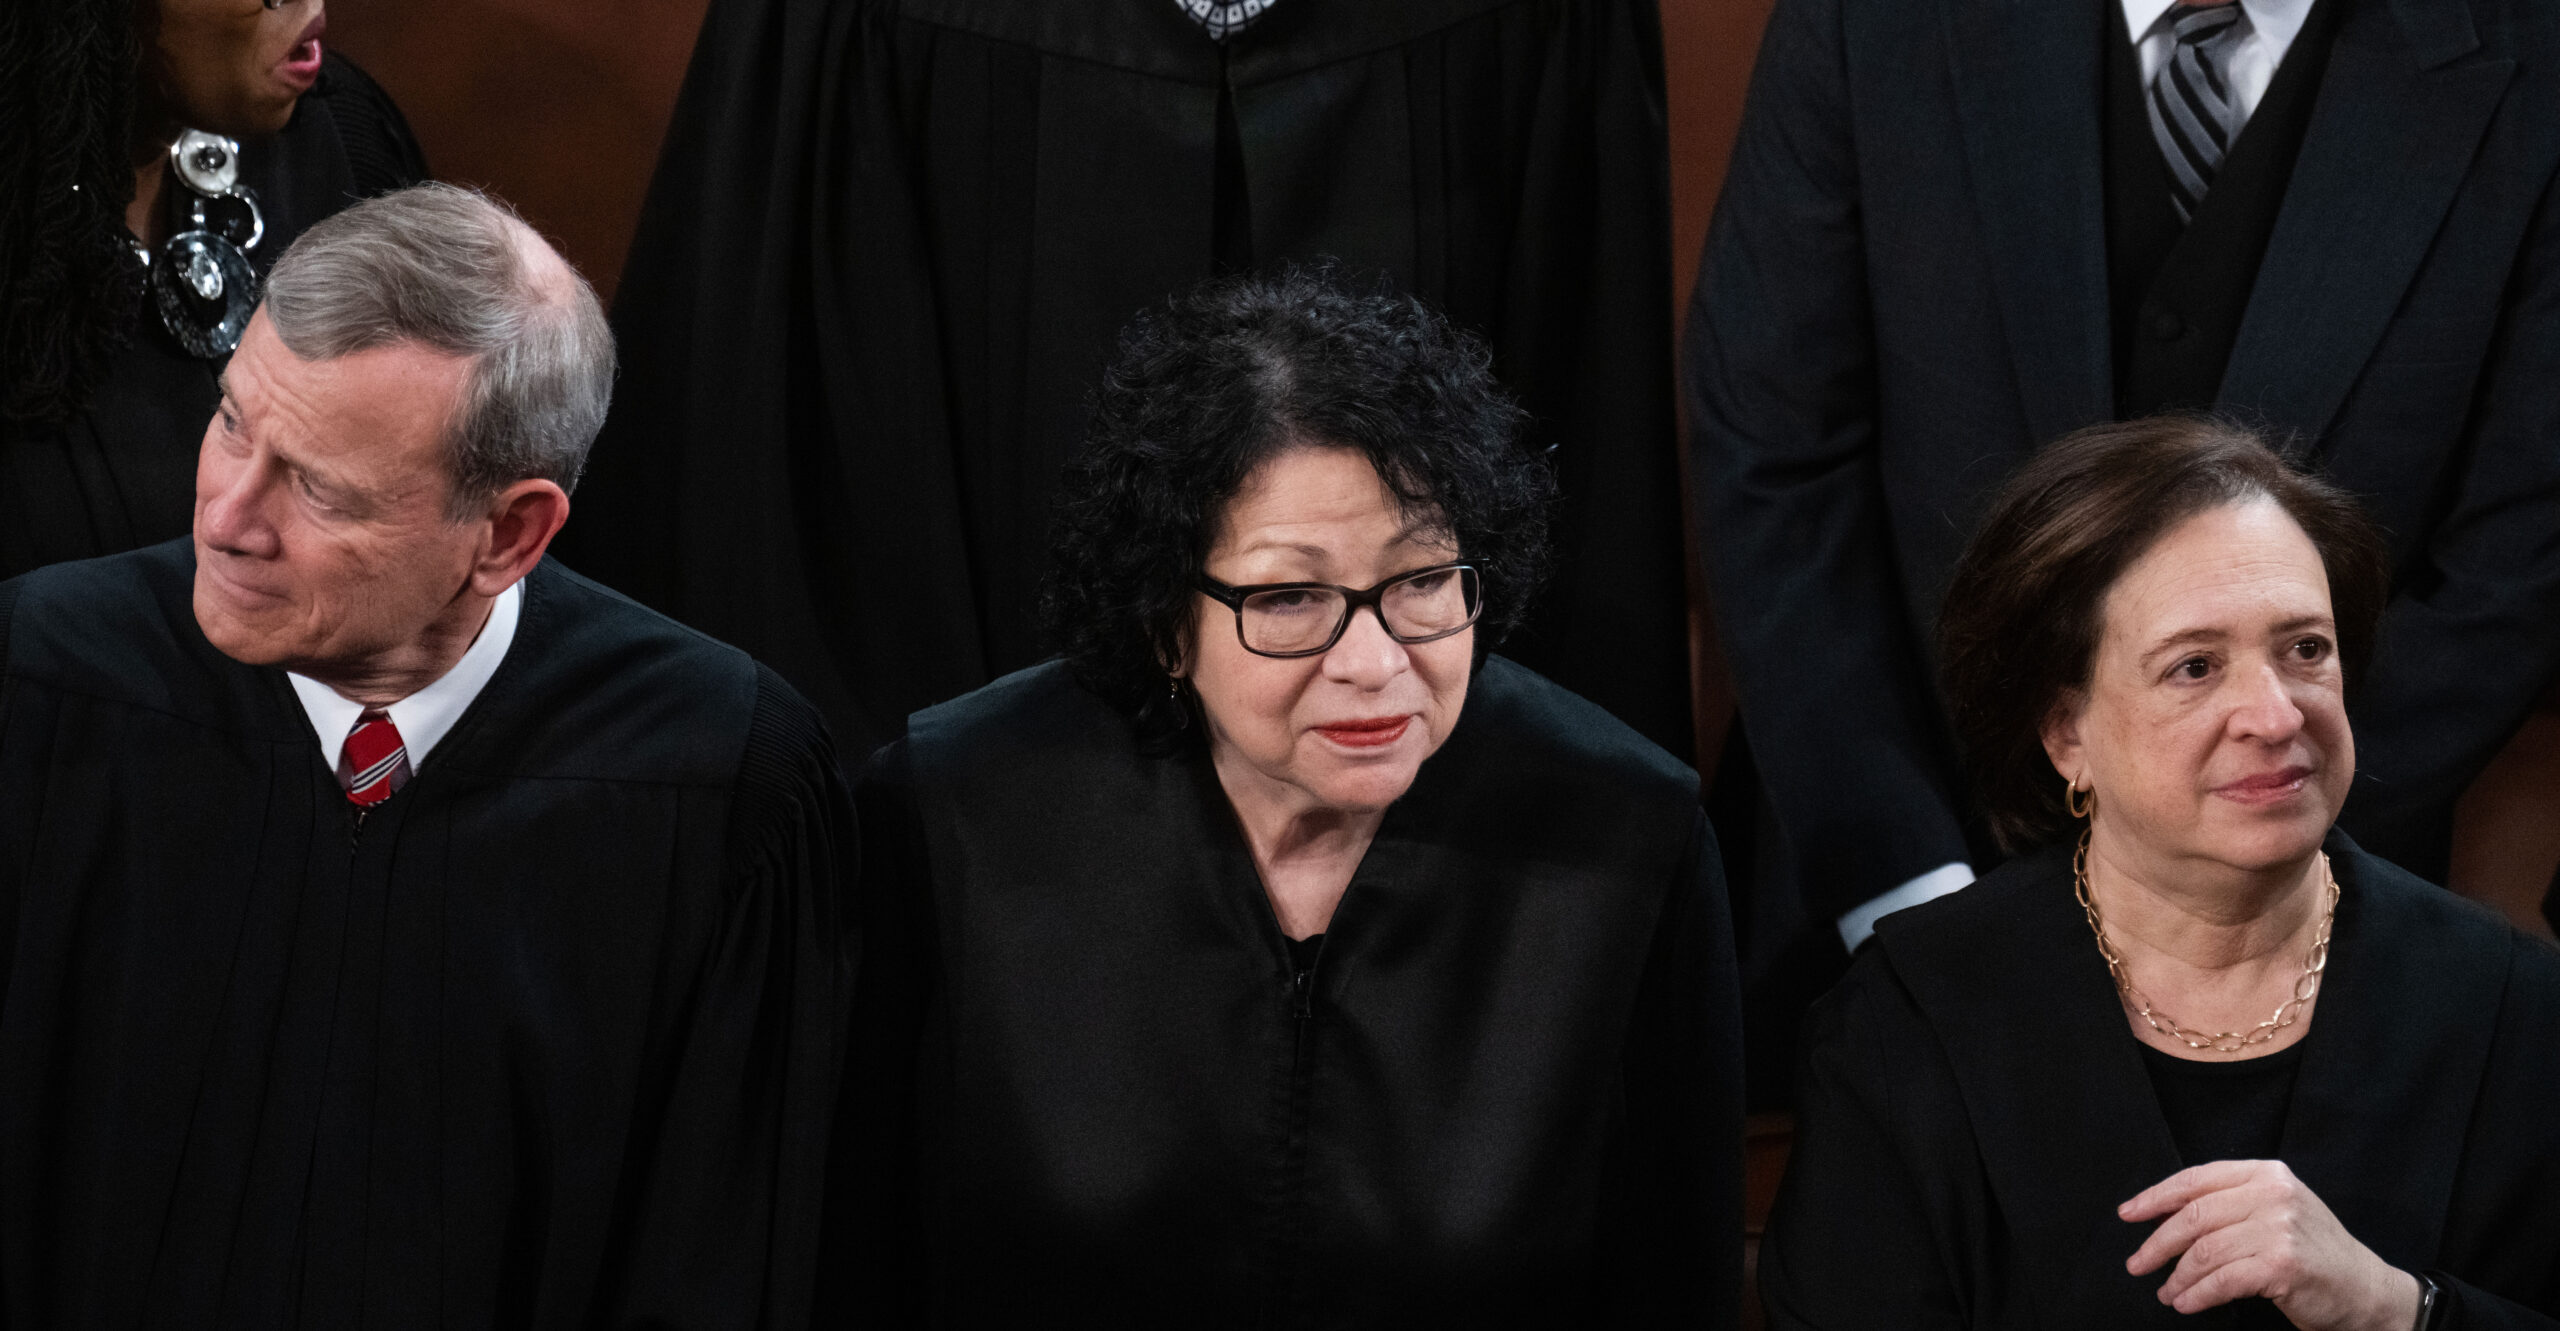 'Unpacking' the Court: Why the Left Wants Sotomayor Gone